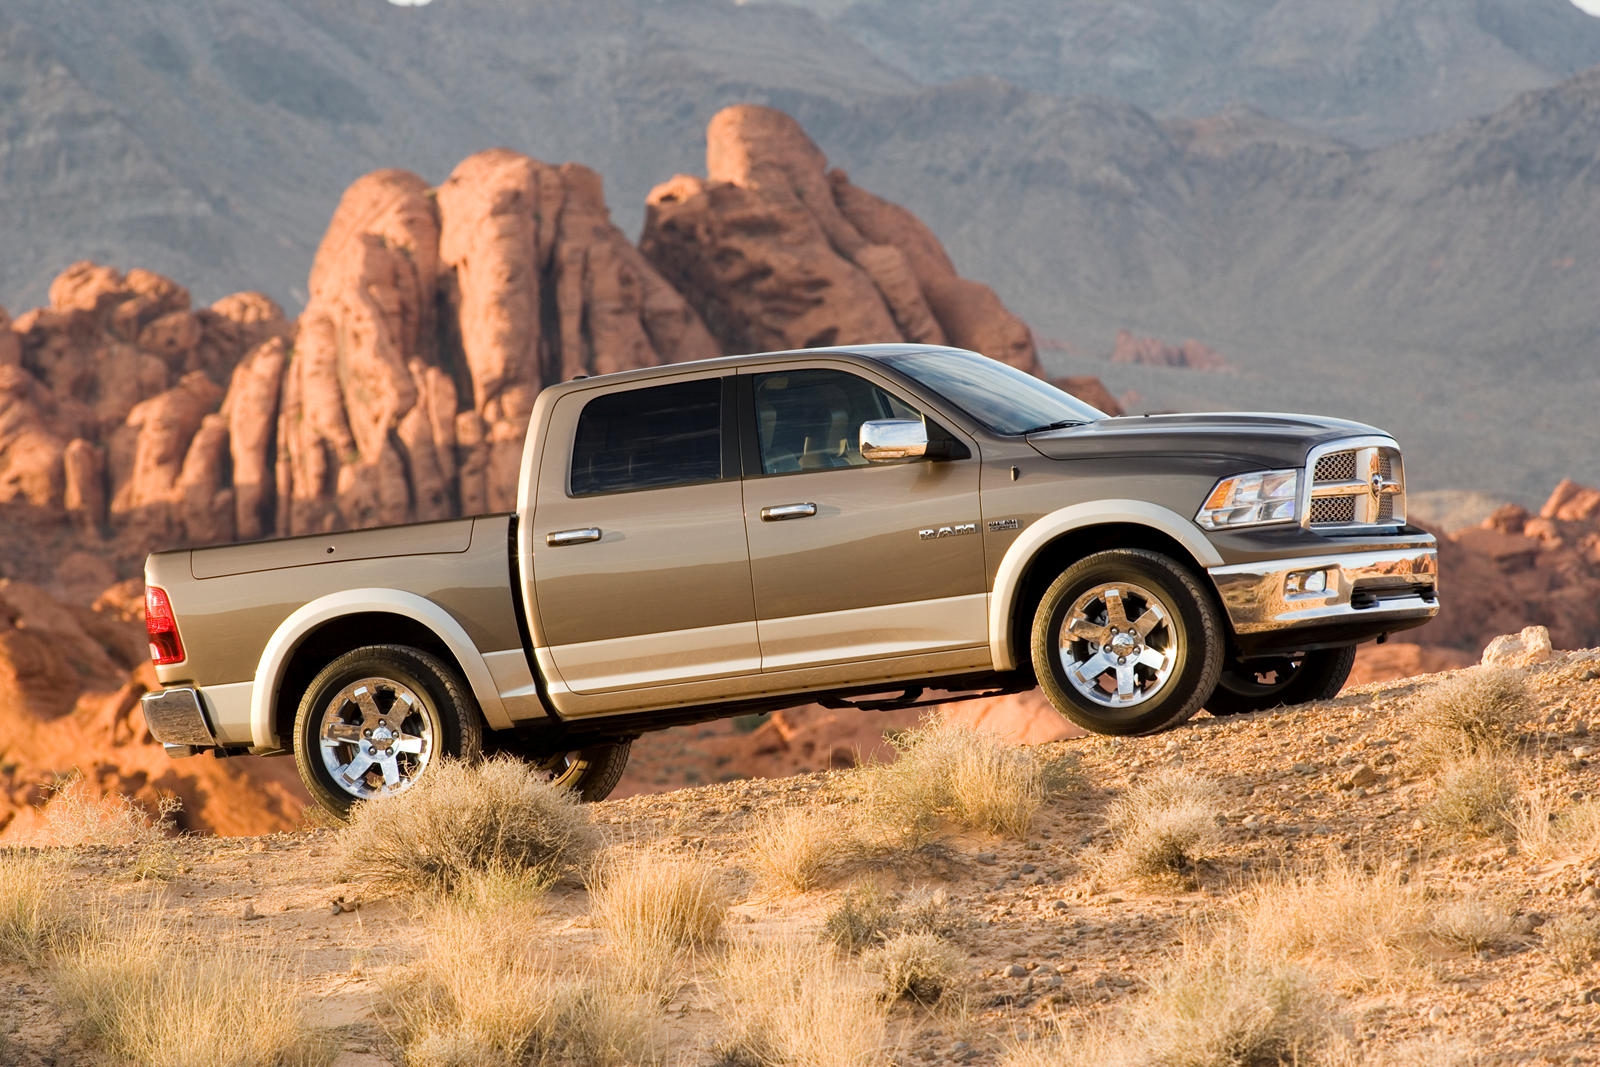 2010 Dodge Ram 1500 - News, reviews, picture galleries and videos - The Car  Guide